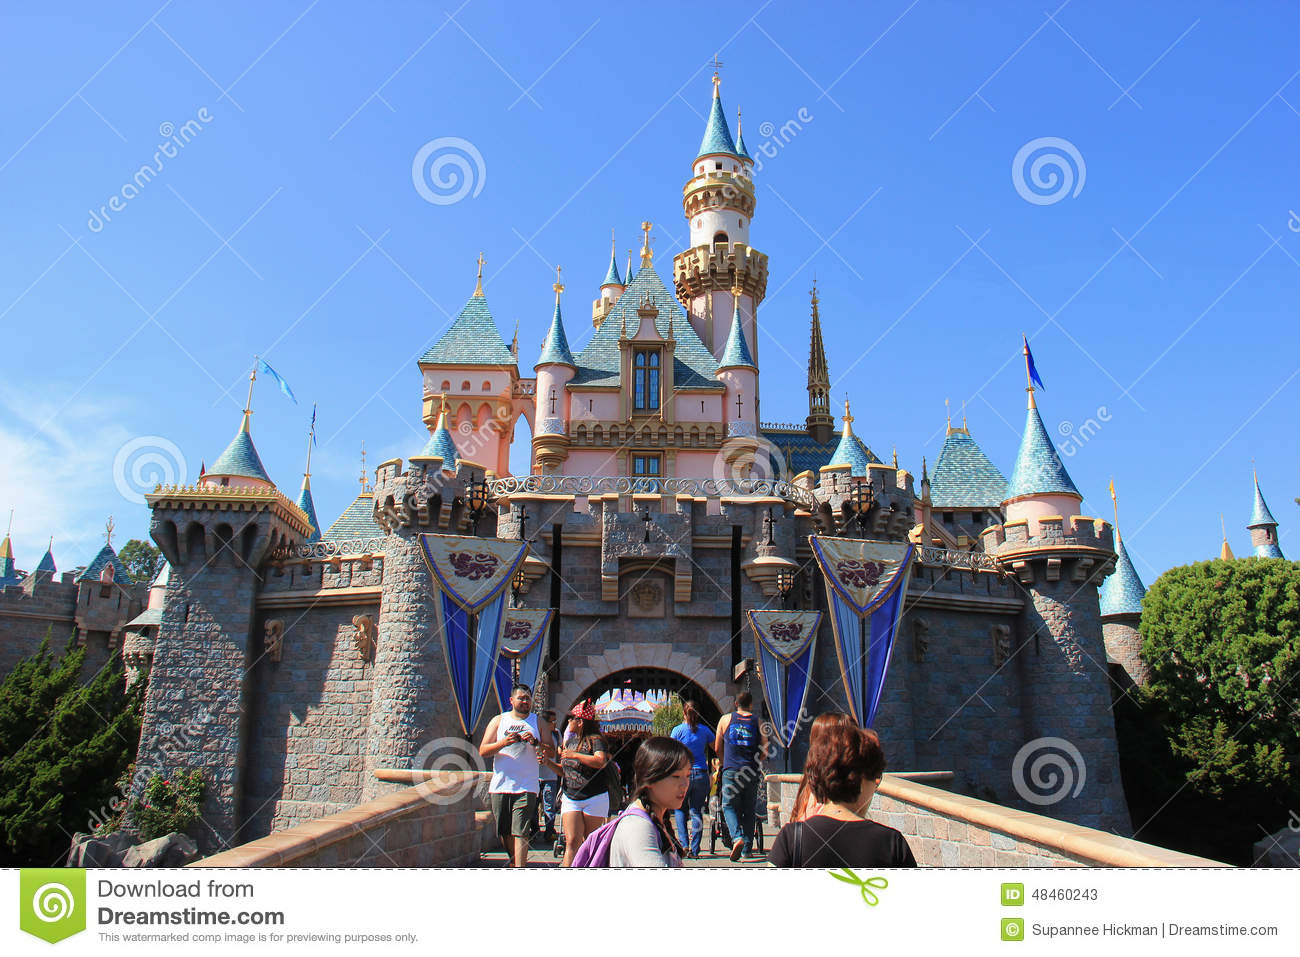 Castle The Fairy Tale Structure Castle At Disneyland Is Based On The